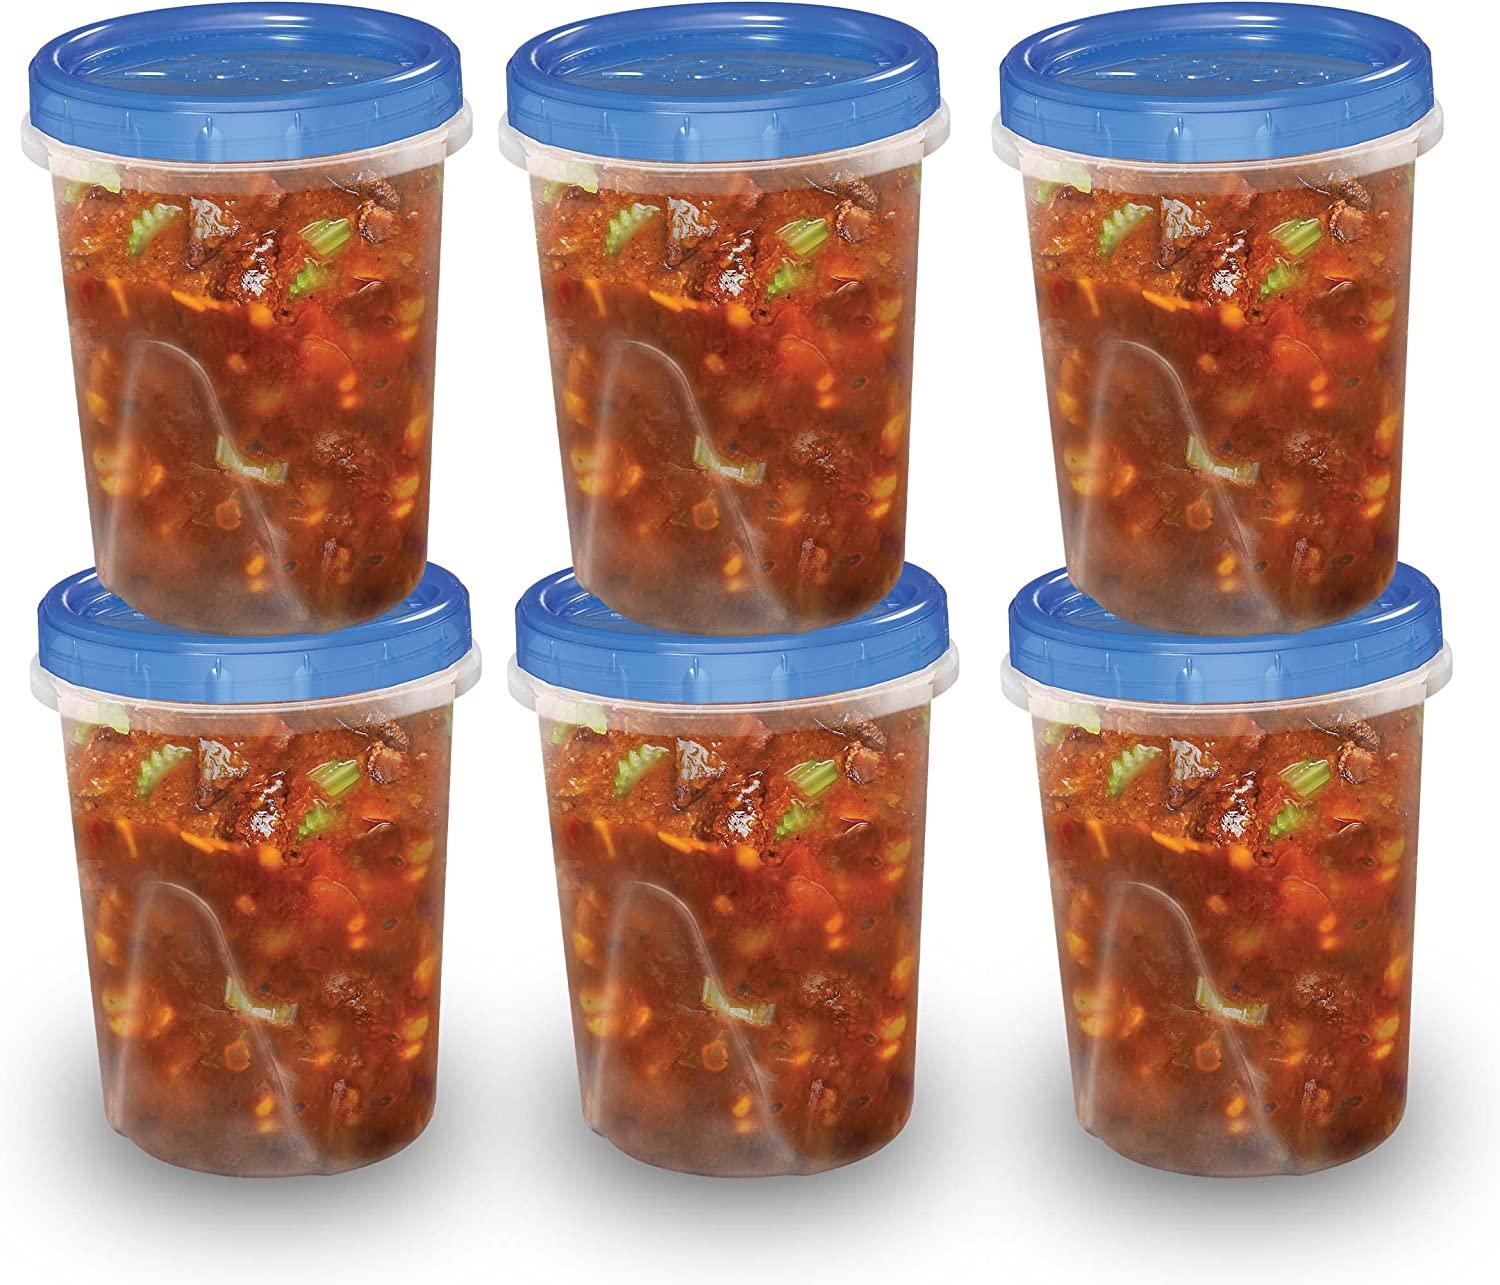 Ziploc Twist n Loc Food Storage Meal Prep Containers for $7.38 Shipped